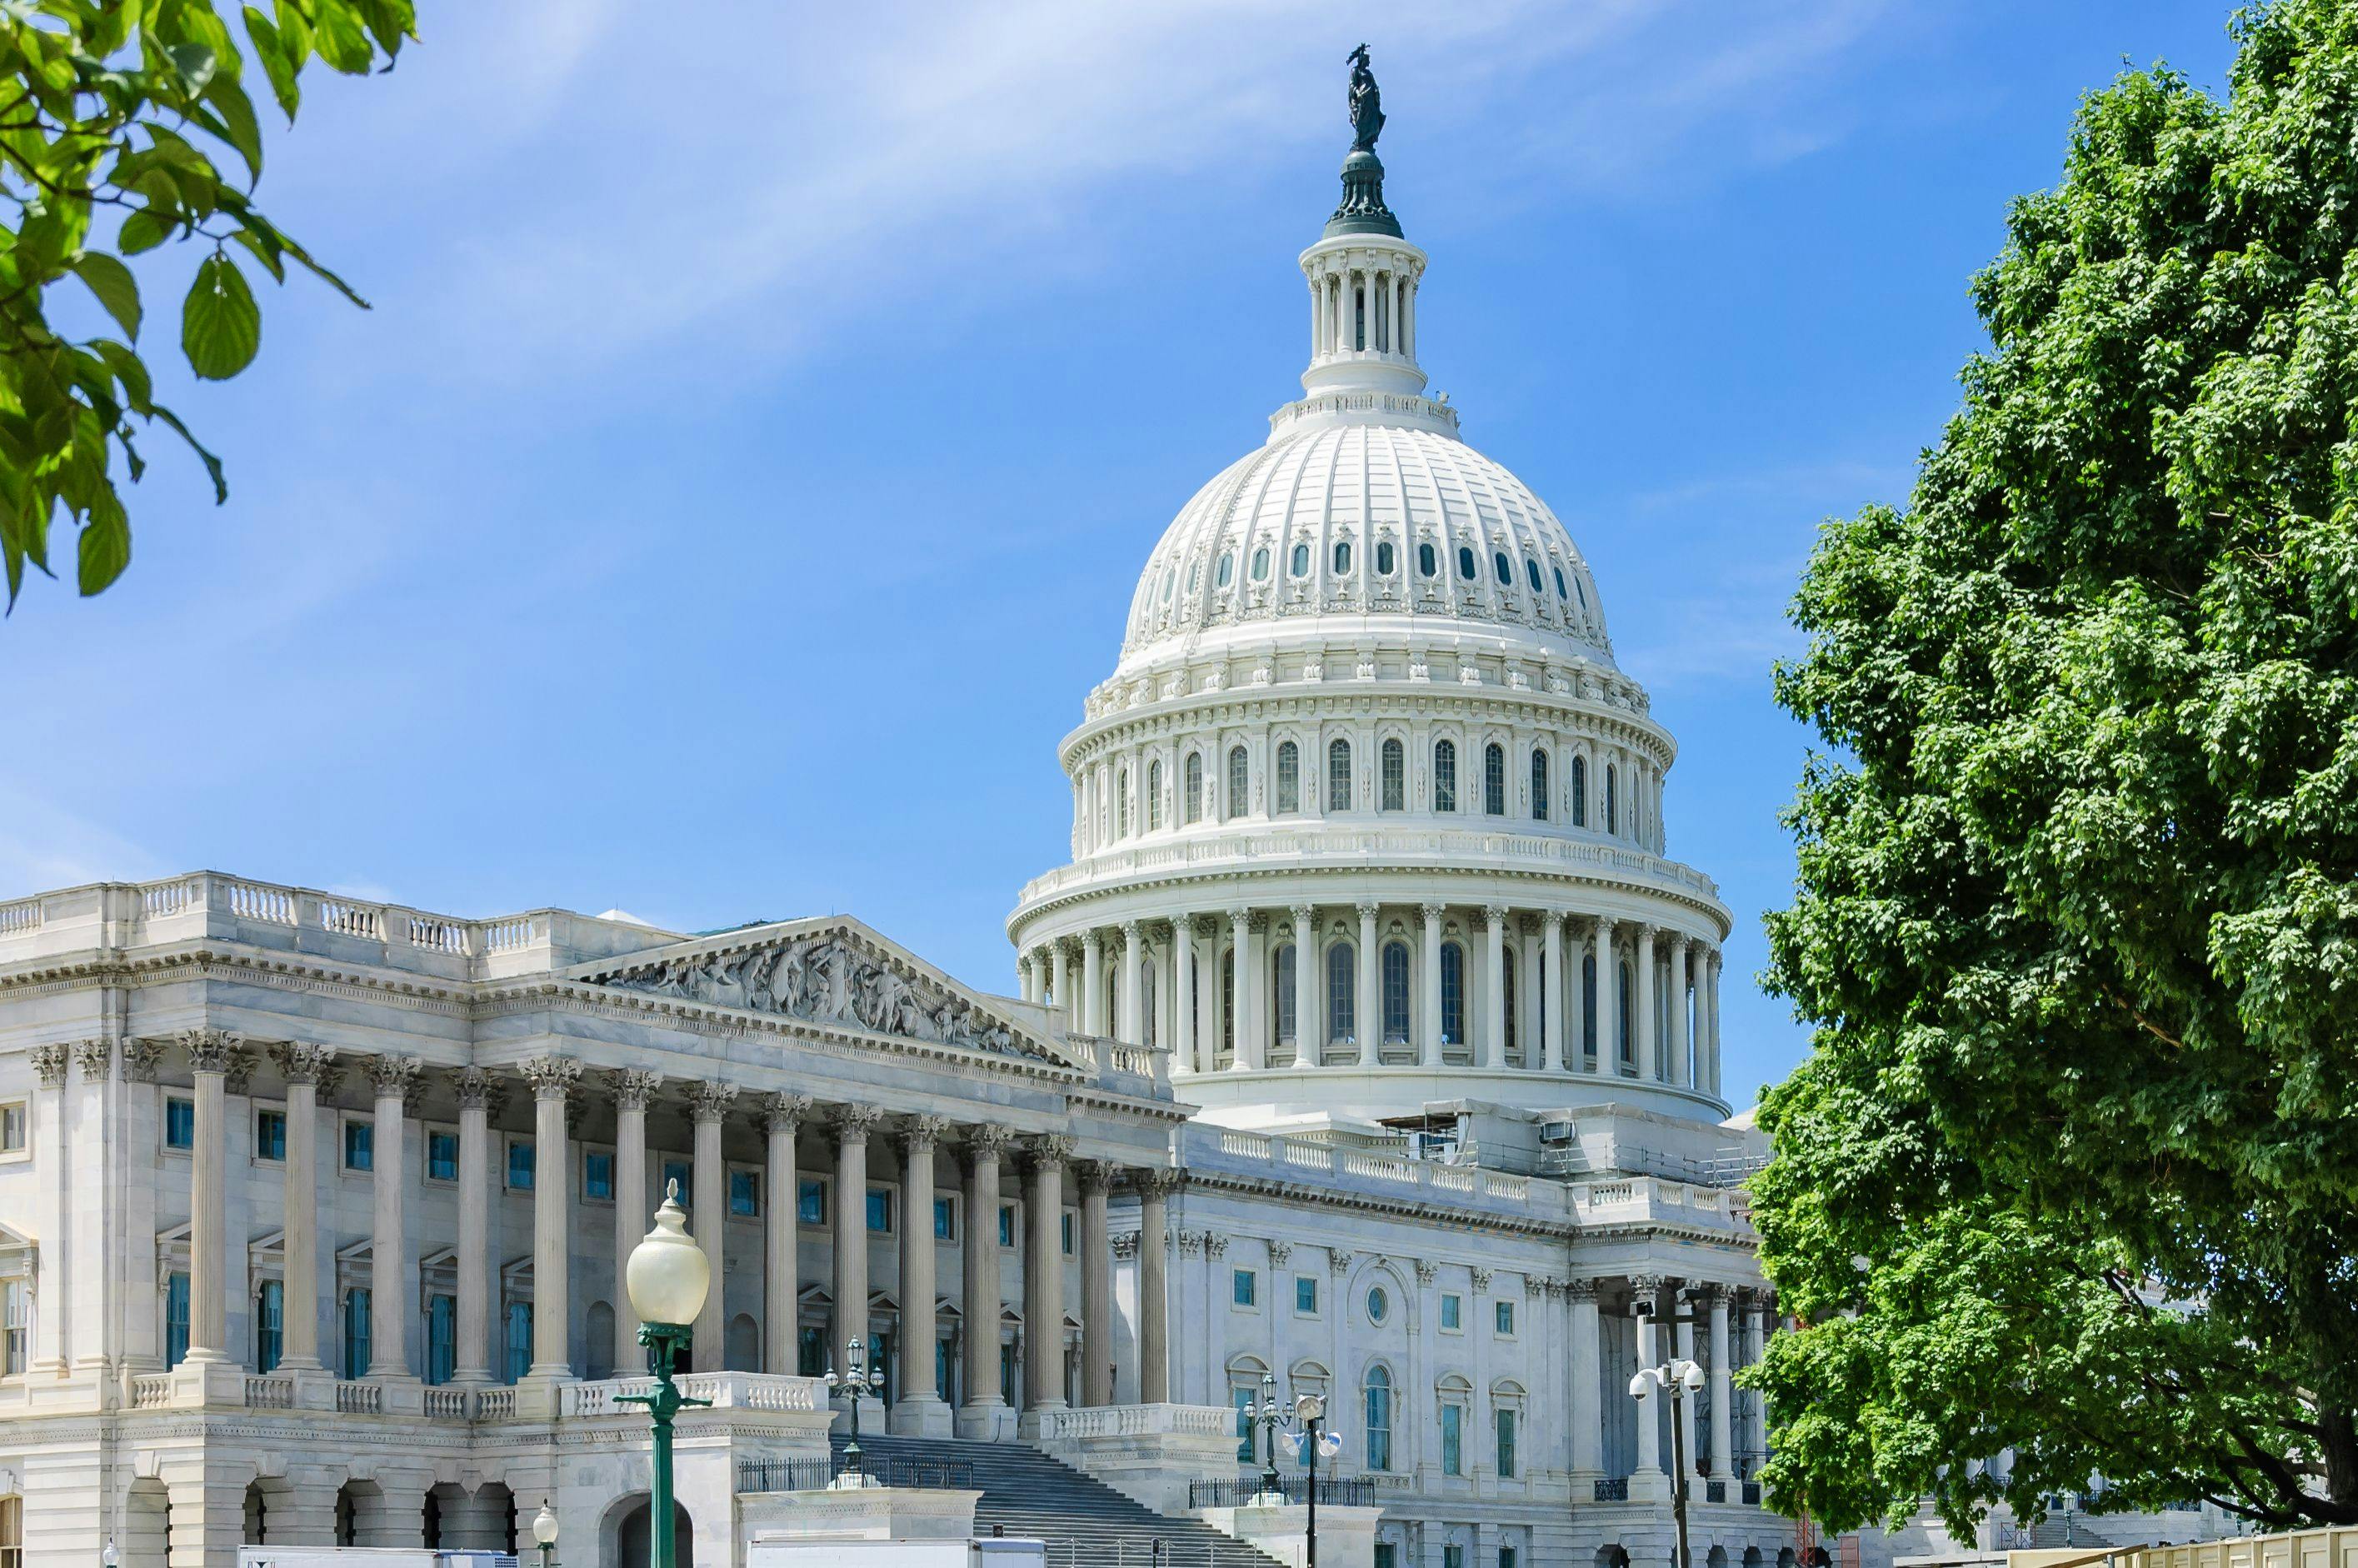 Republicans in Congress are pushing to ease restrictions on physician-owned hospitals. (Image credit: ©Pierrette Guertin - stock.adobe.com)